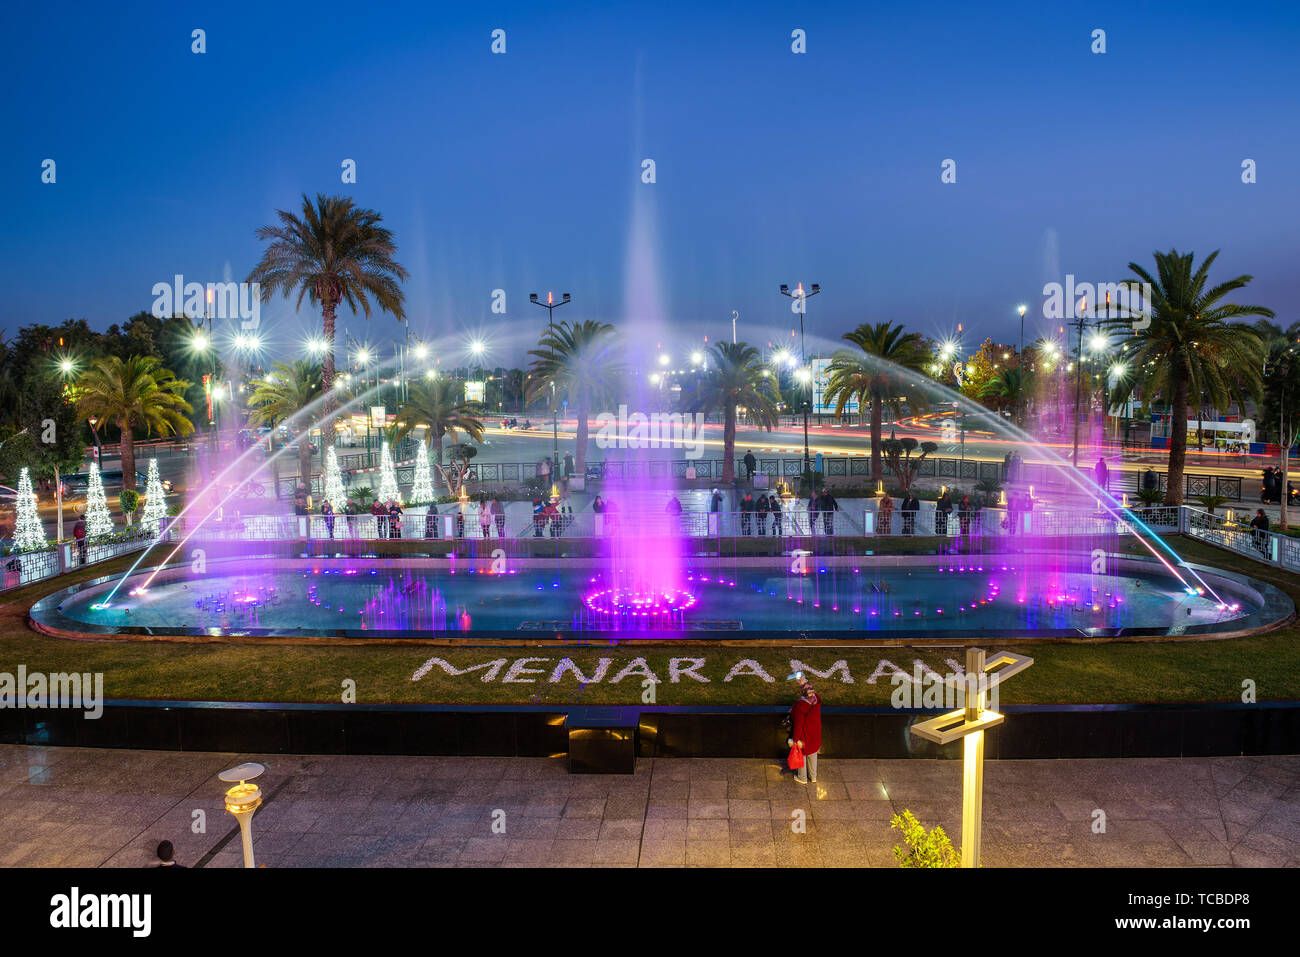 Singing fountain located at the Menara Mall in Marrakech at night Stock Photo